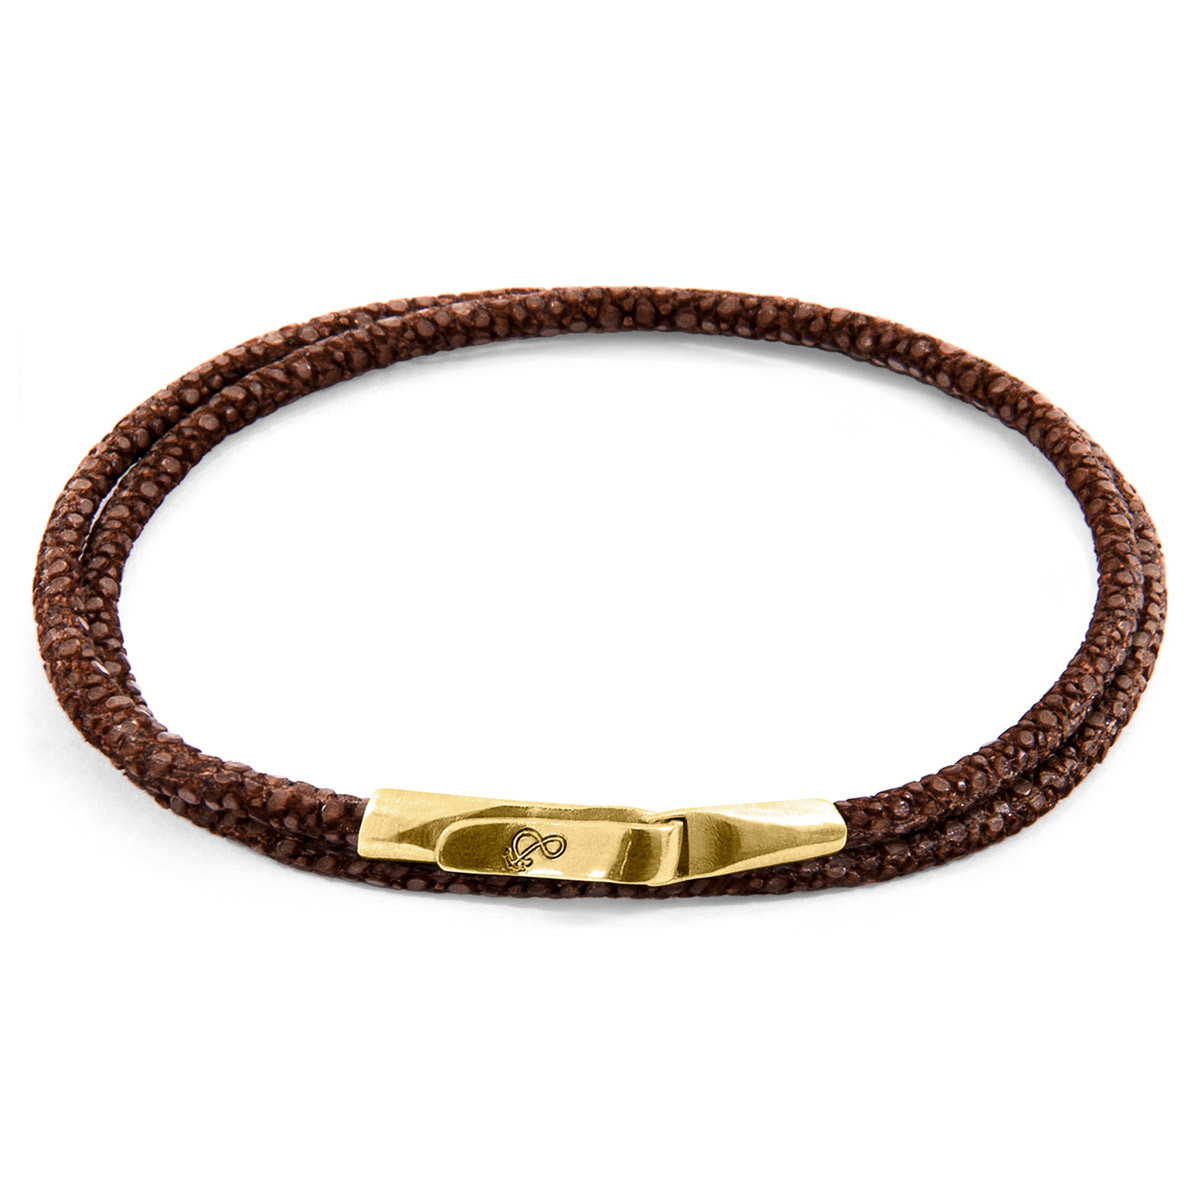 Mocha Brown Liverpool 9ct Yellow Gold and Stingray Leather Bracelet